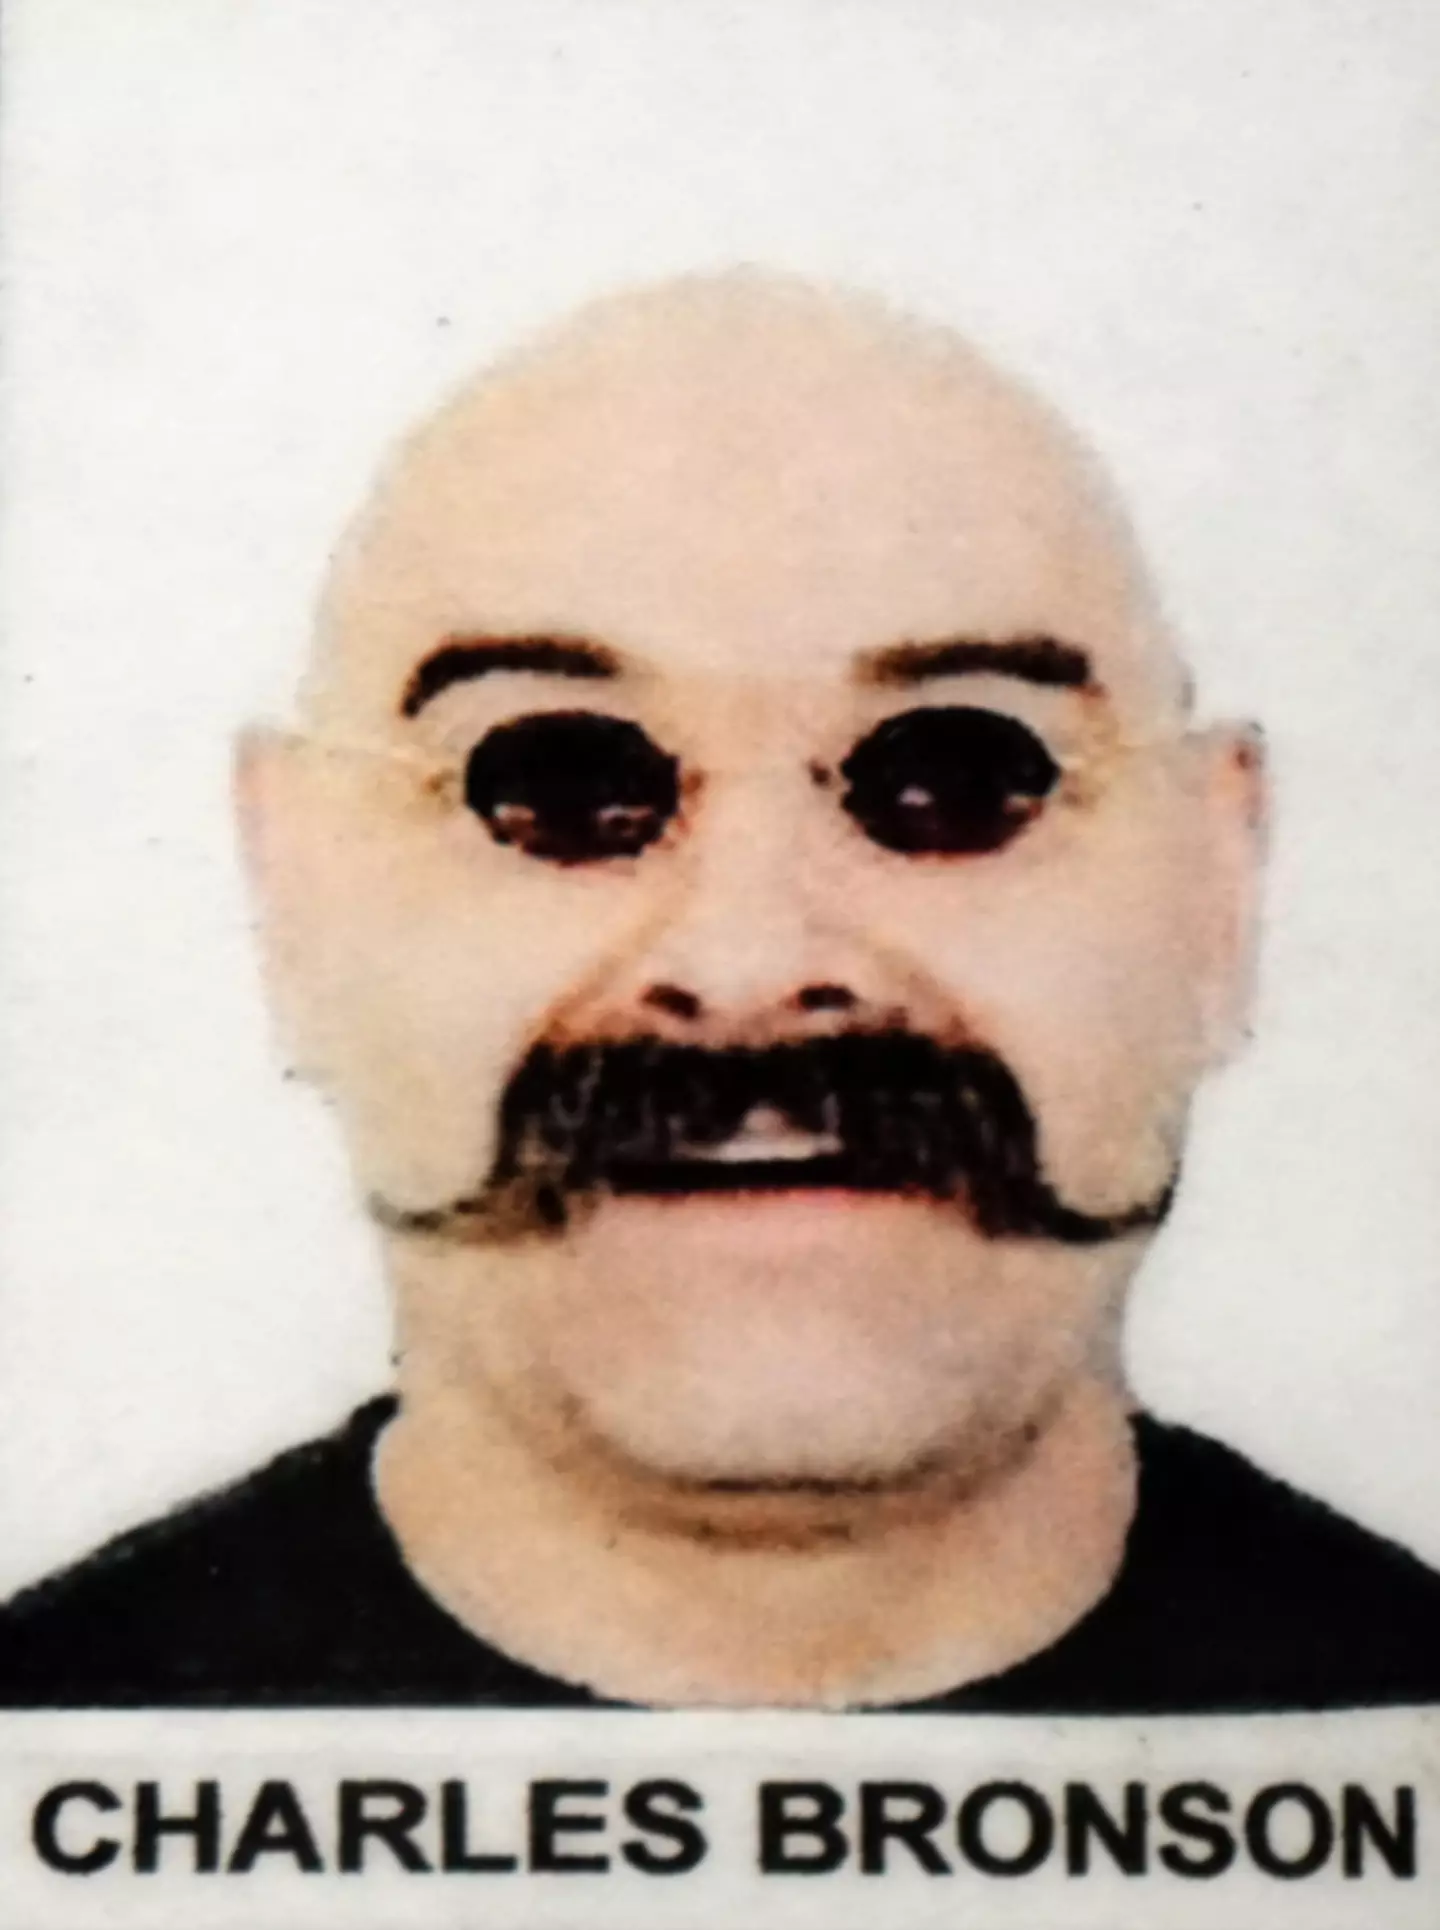 Charles Bronson's latest parole request has been unsuccessful.